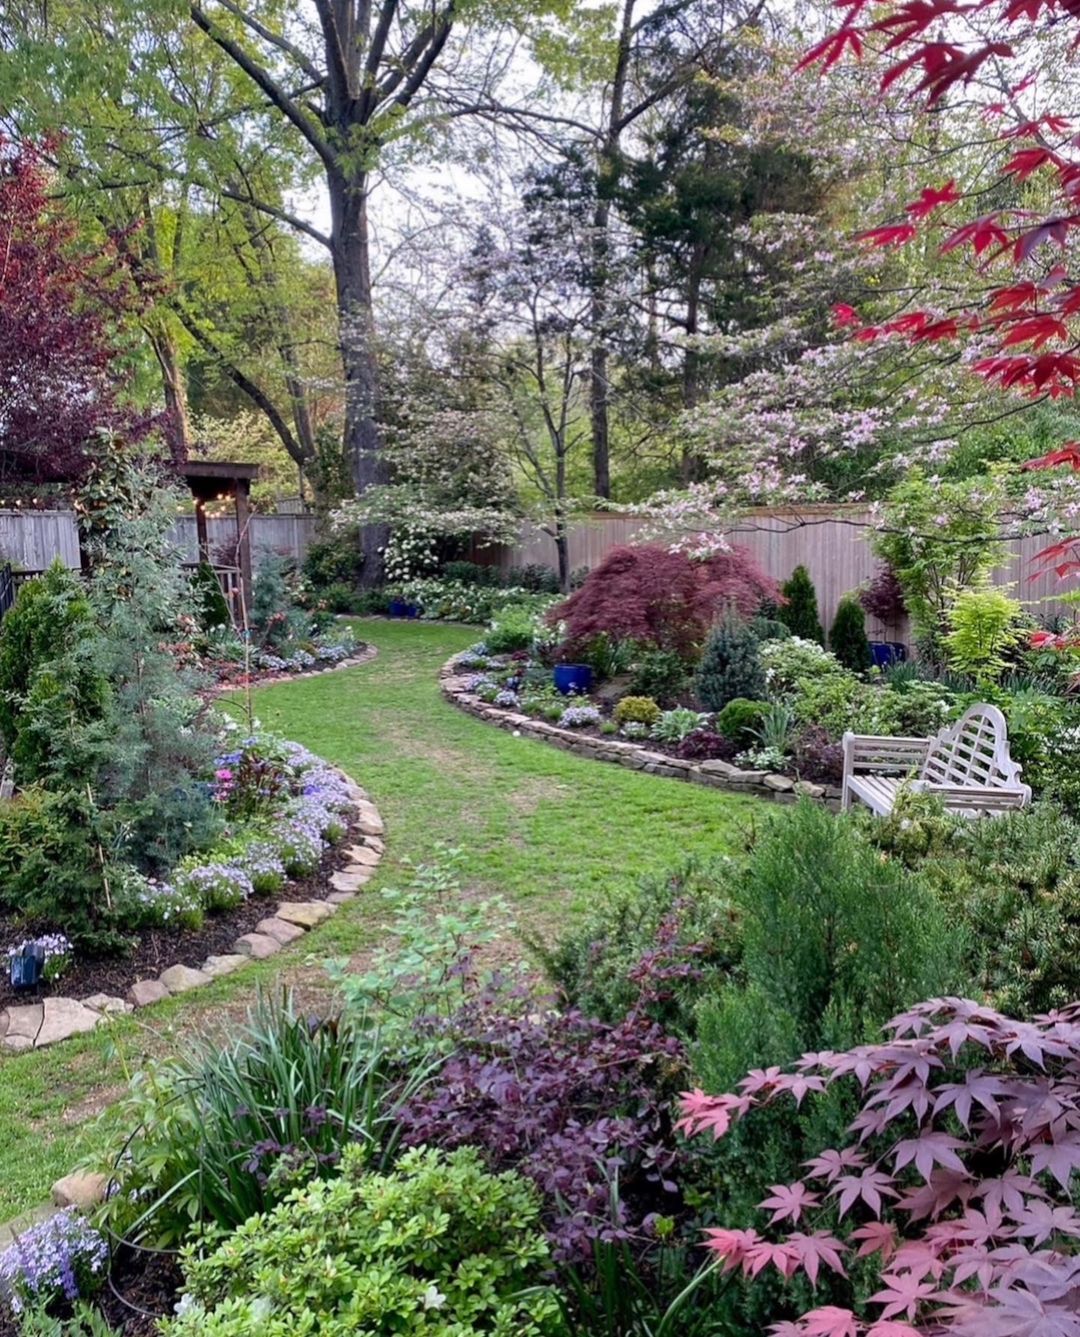 Transforming Limited Outdoor Space into a Beautiful Garden: Small Yard Landscaping Tips